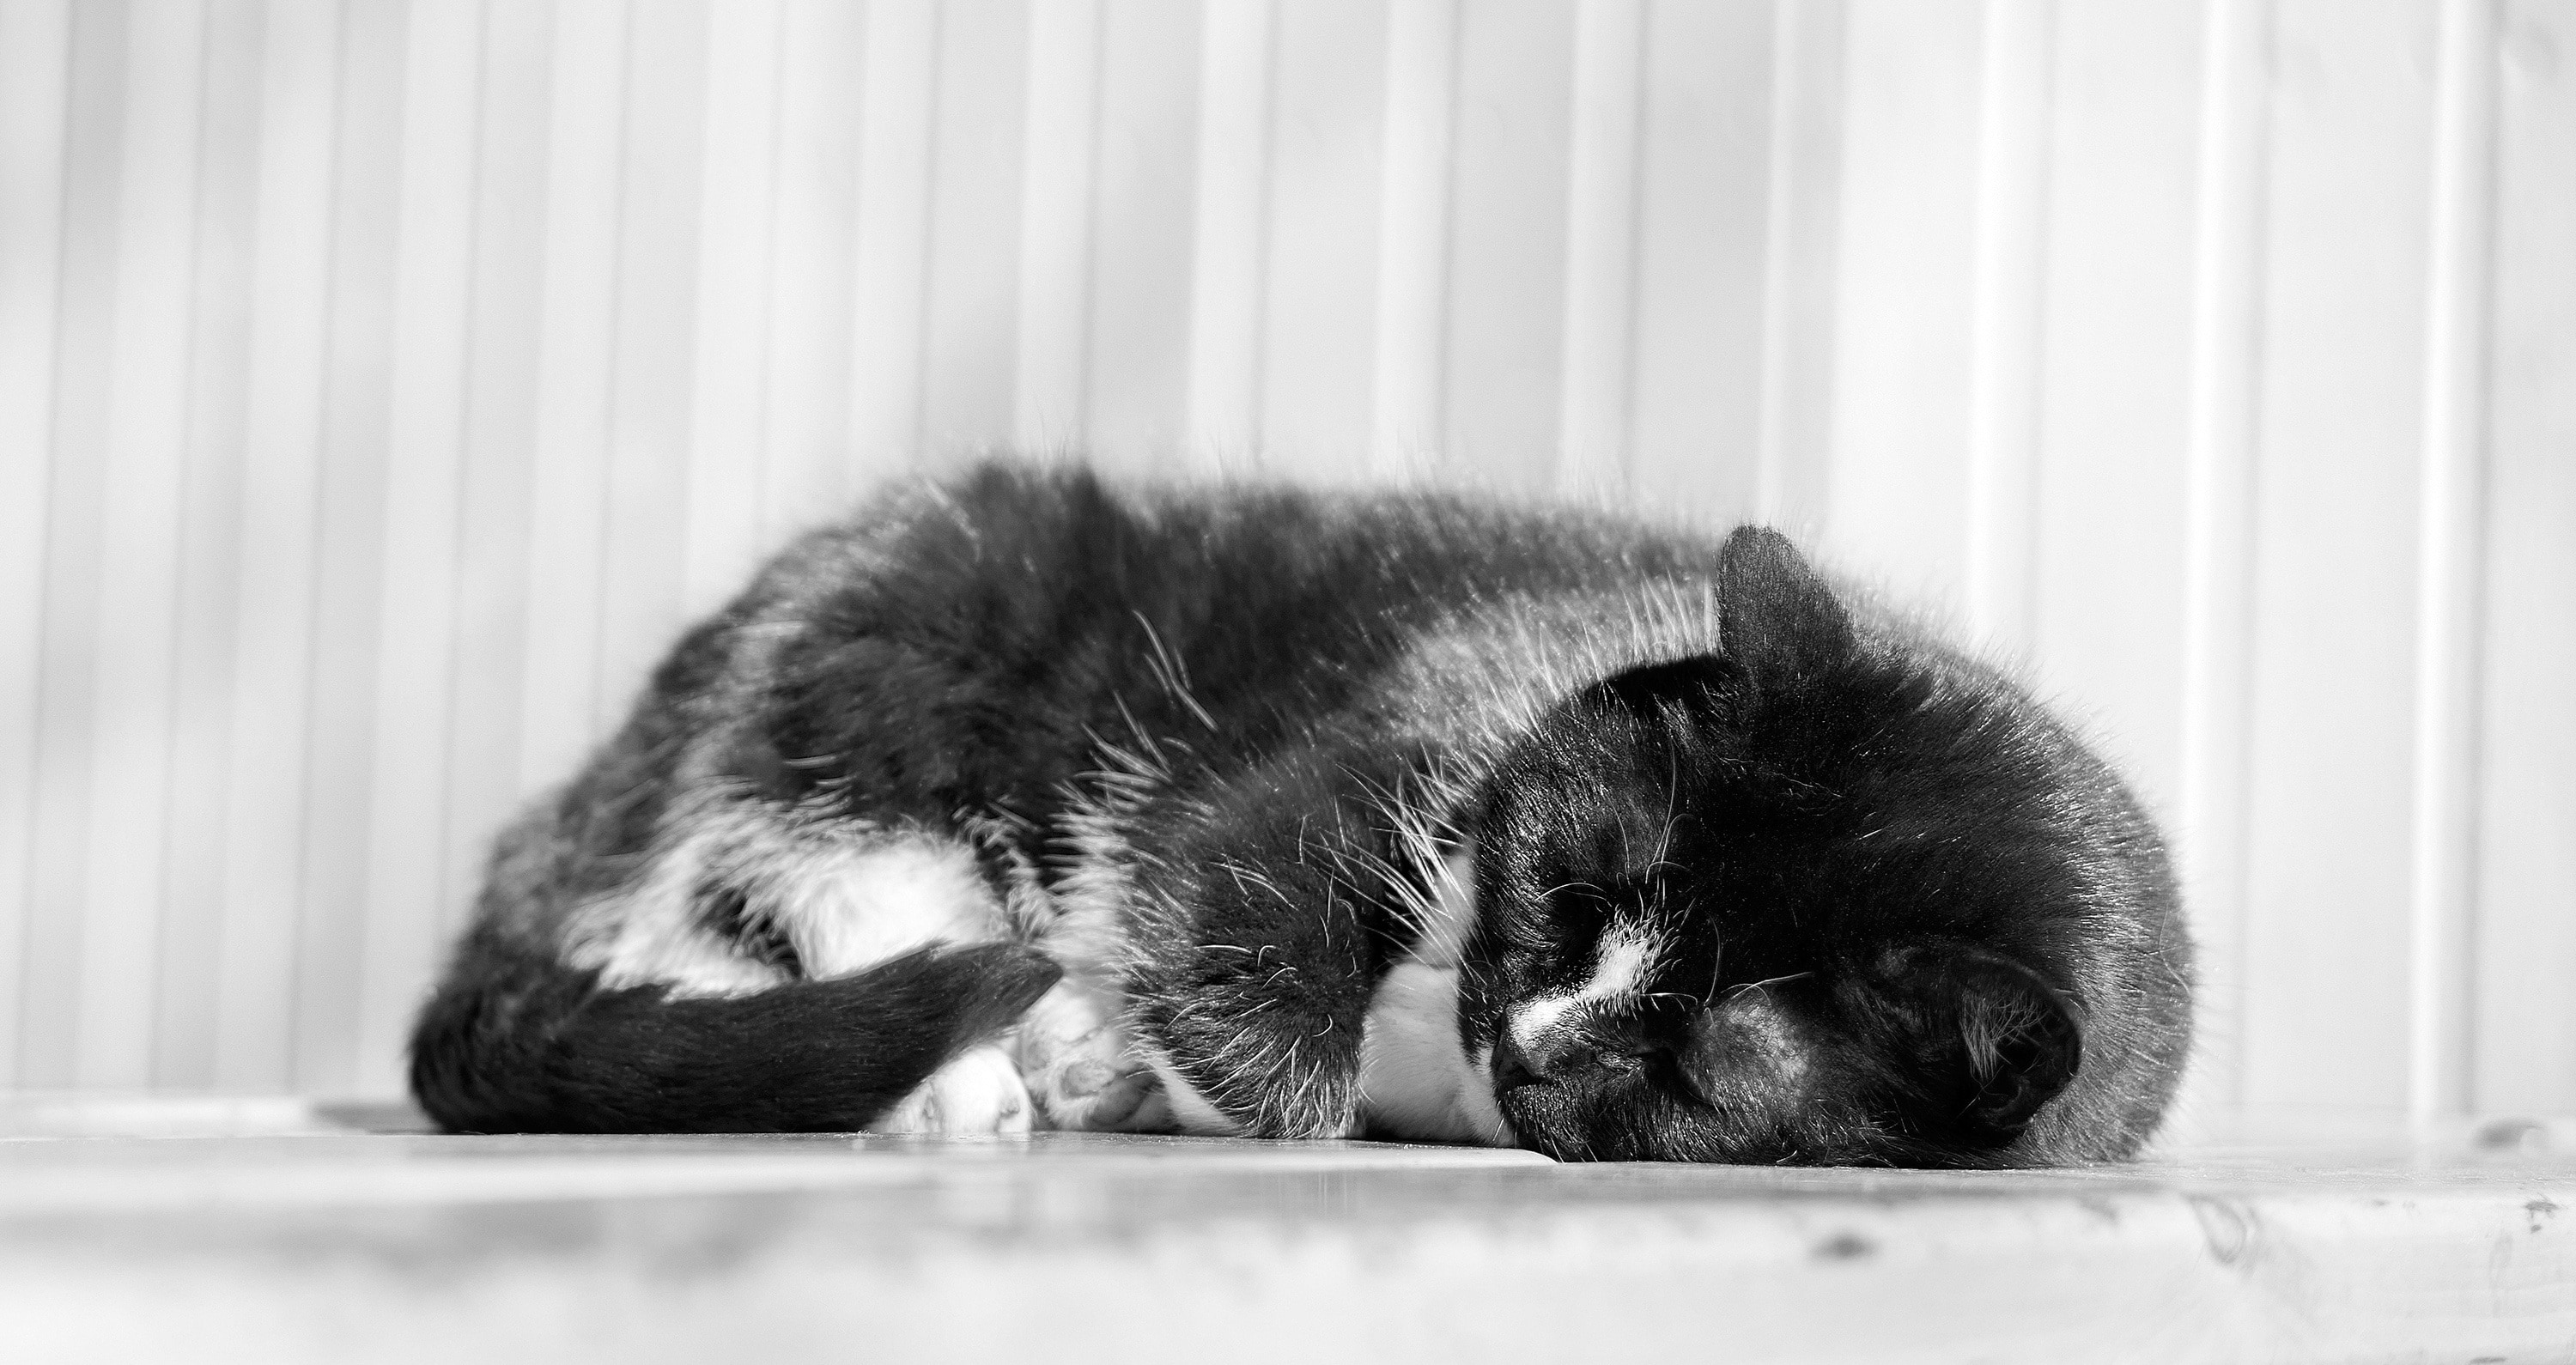 grayscale photo of black and white fur cat lying on white surface